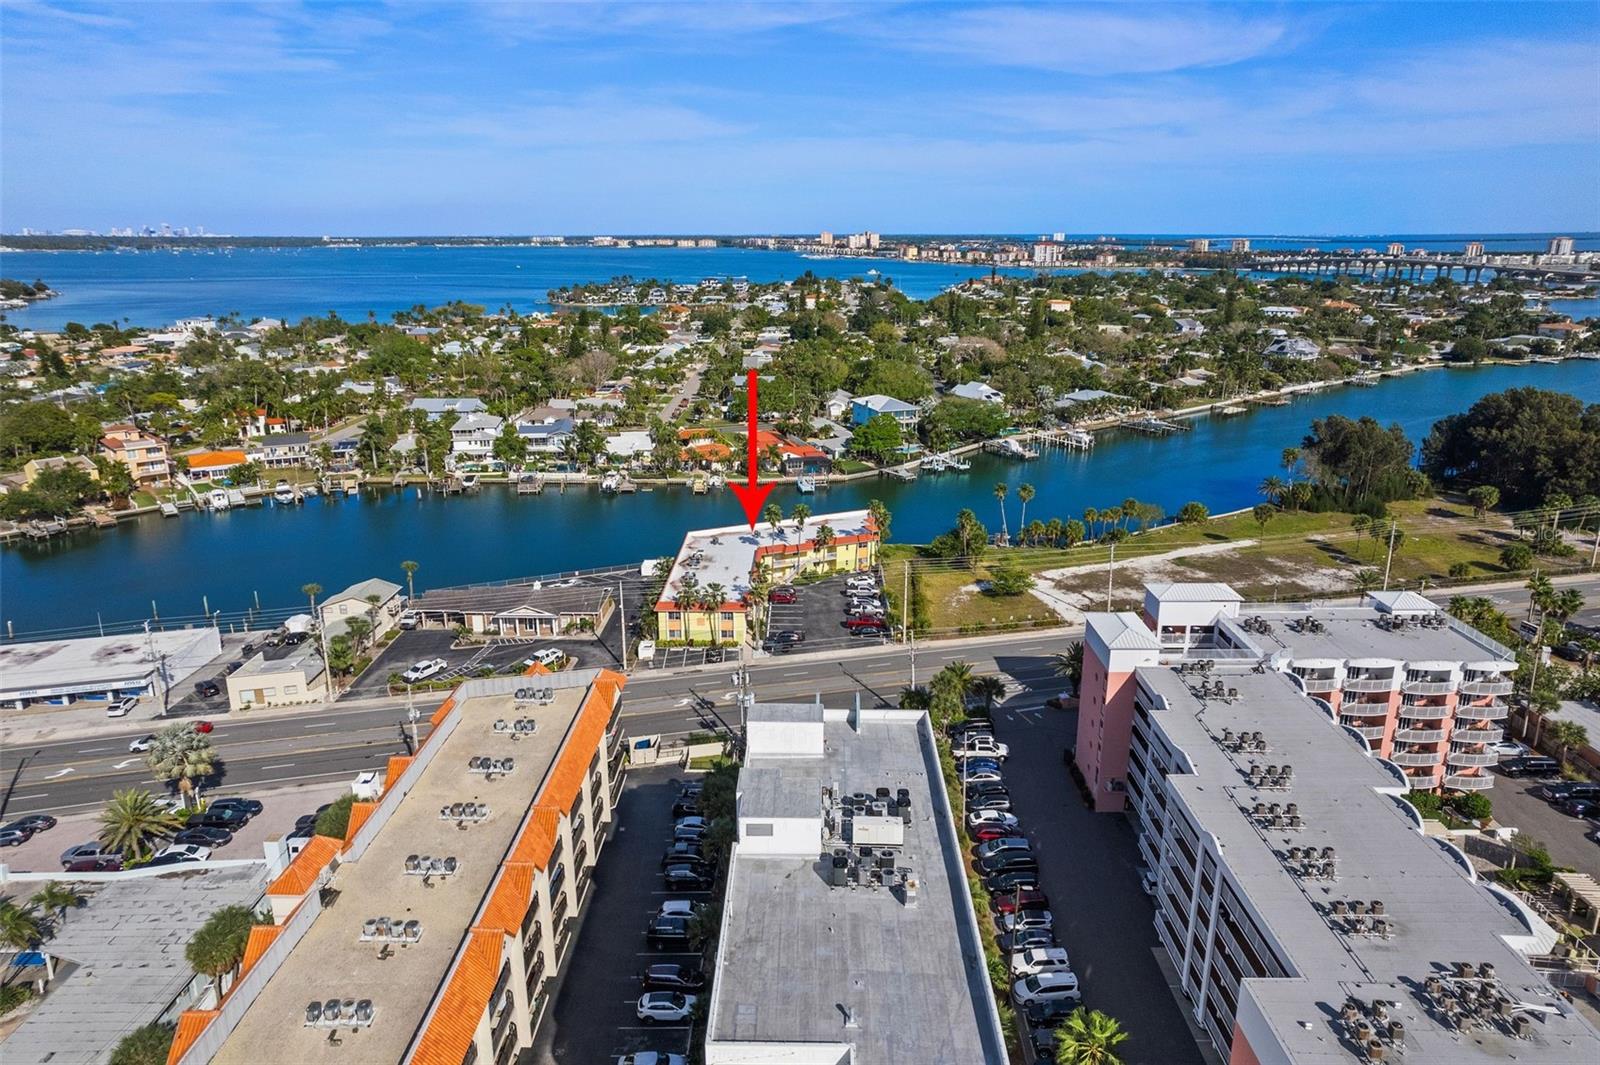 You can see Downtown St. Pete in the far distant on the left-hand side of this photo. It is about 15 minutes drive.